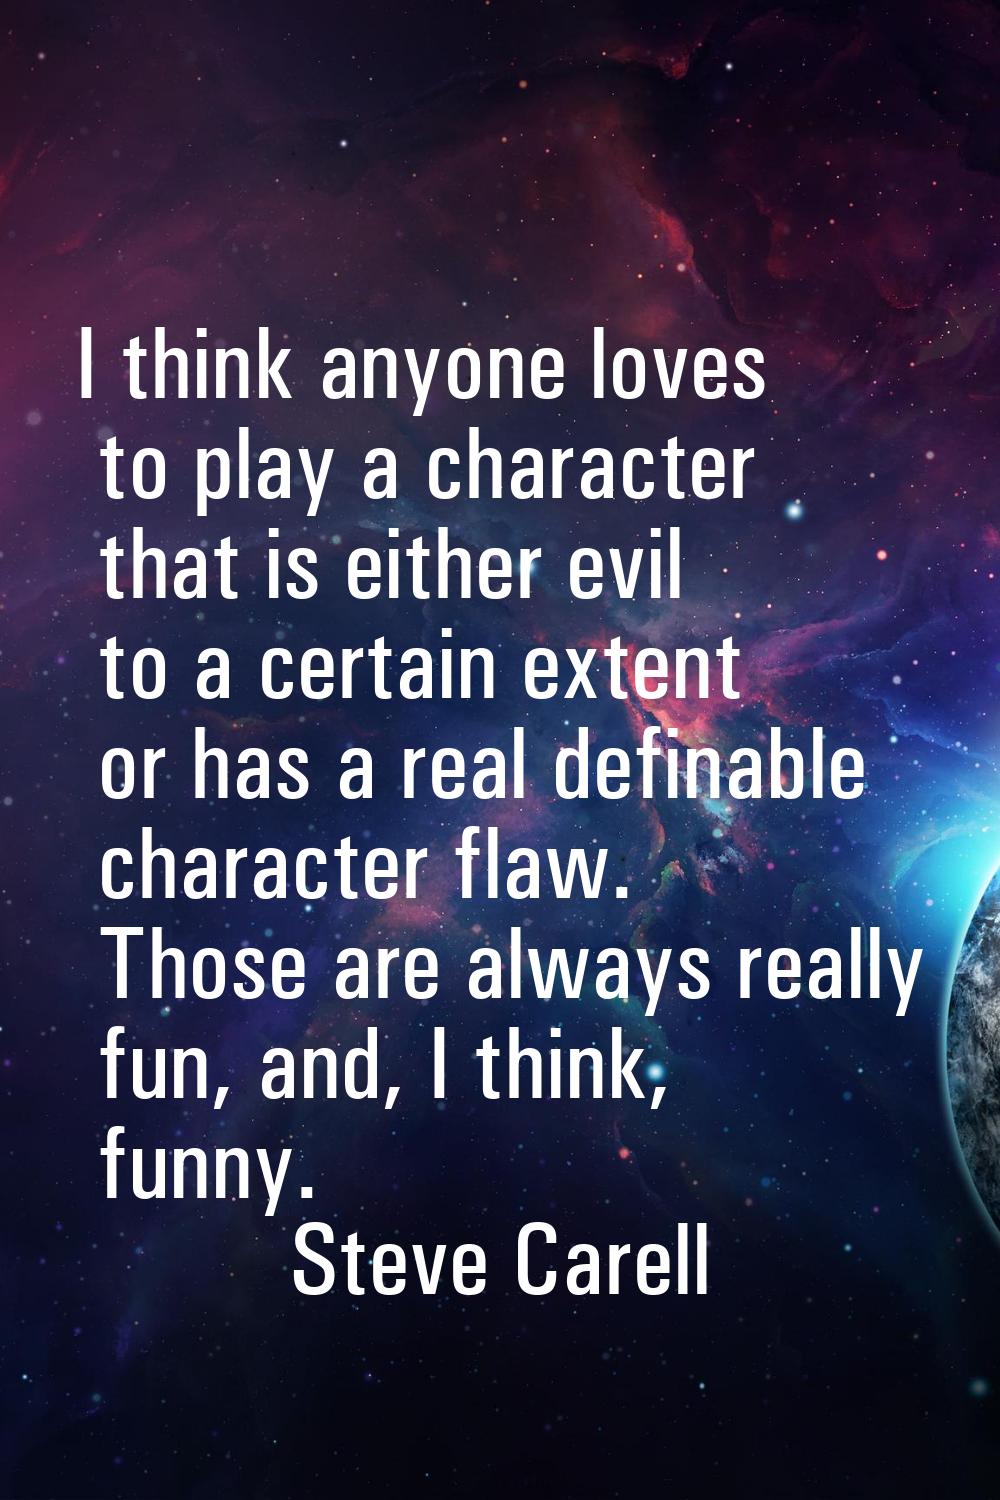 I think anyone loves to play a character that is either evil to a certain extent or has a real defi